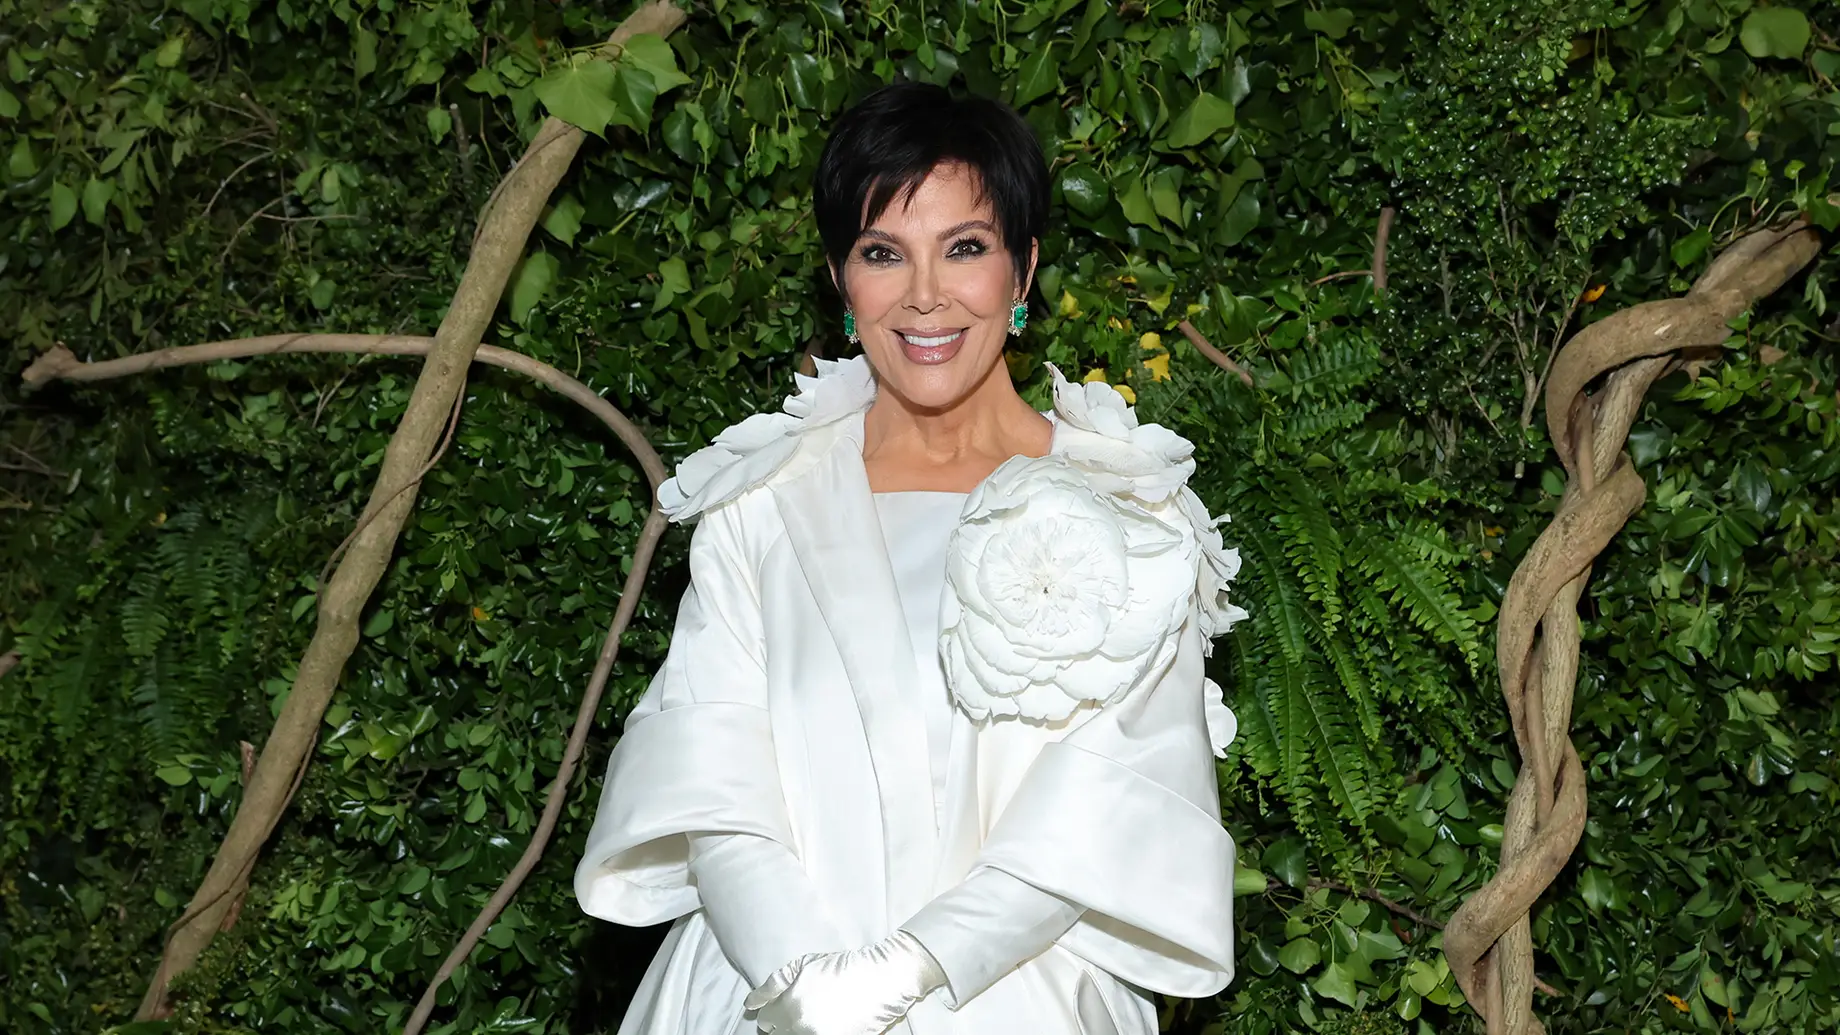 Say What Now? Kris Jenner Suggests She Wants to Have Another Kid at 68